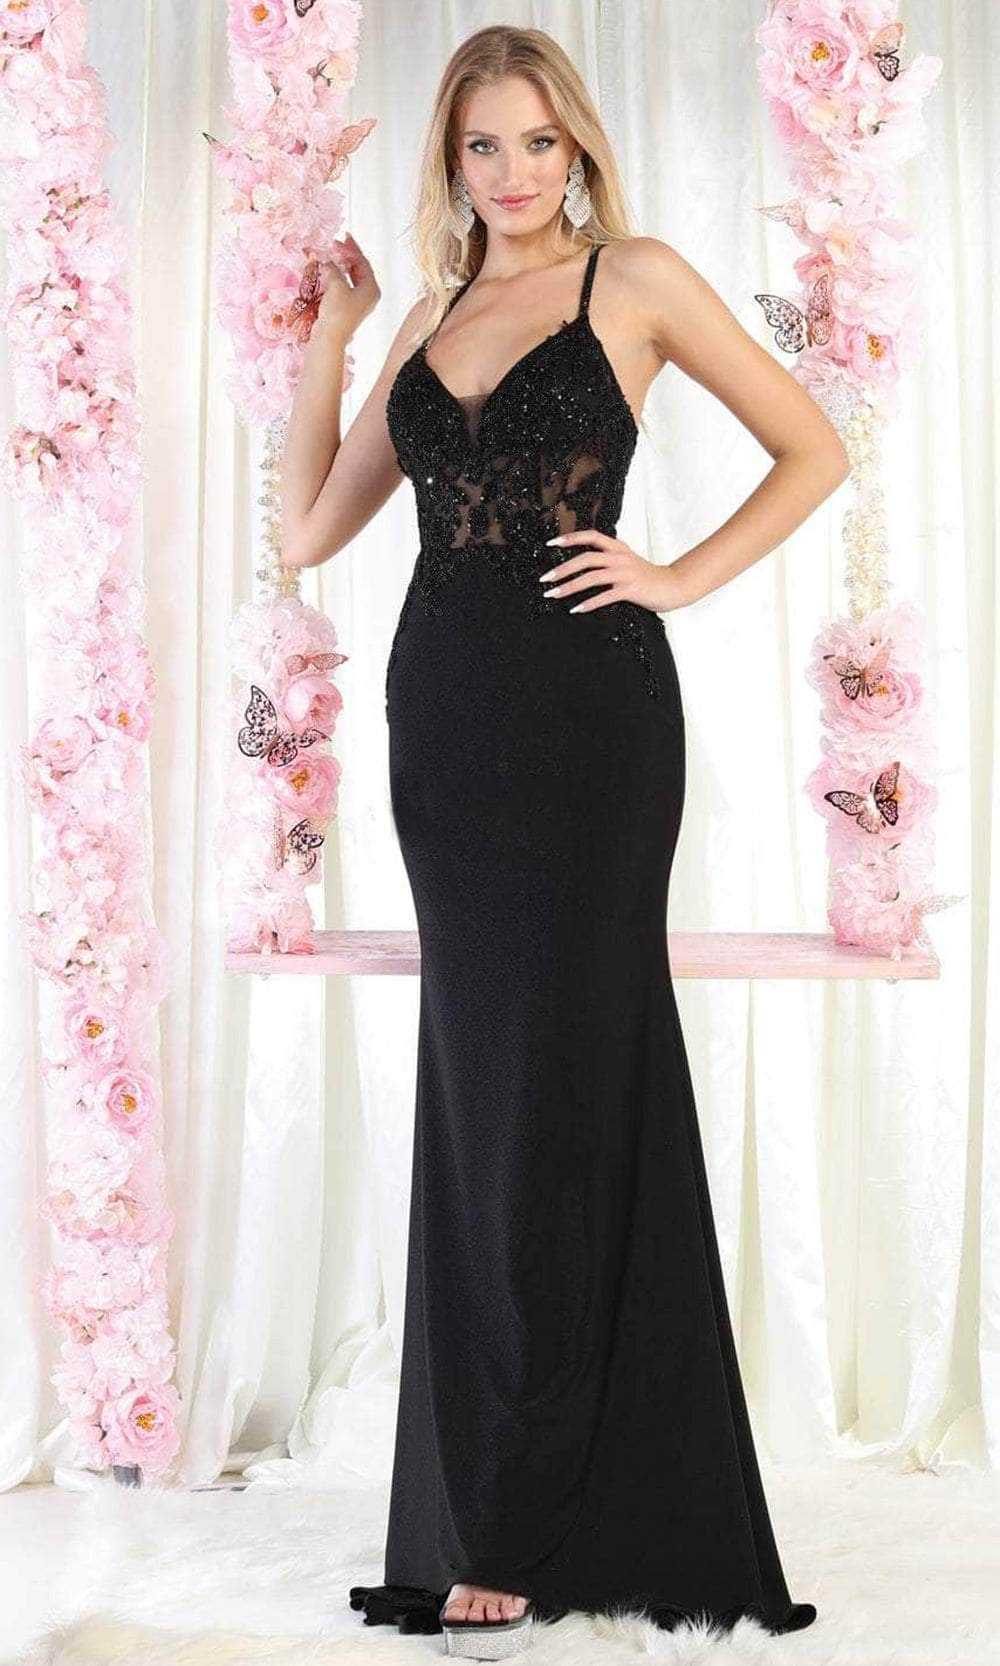 May Queen, May Queen RQ7991 - Embellished Sleeveless Evening Dress